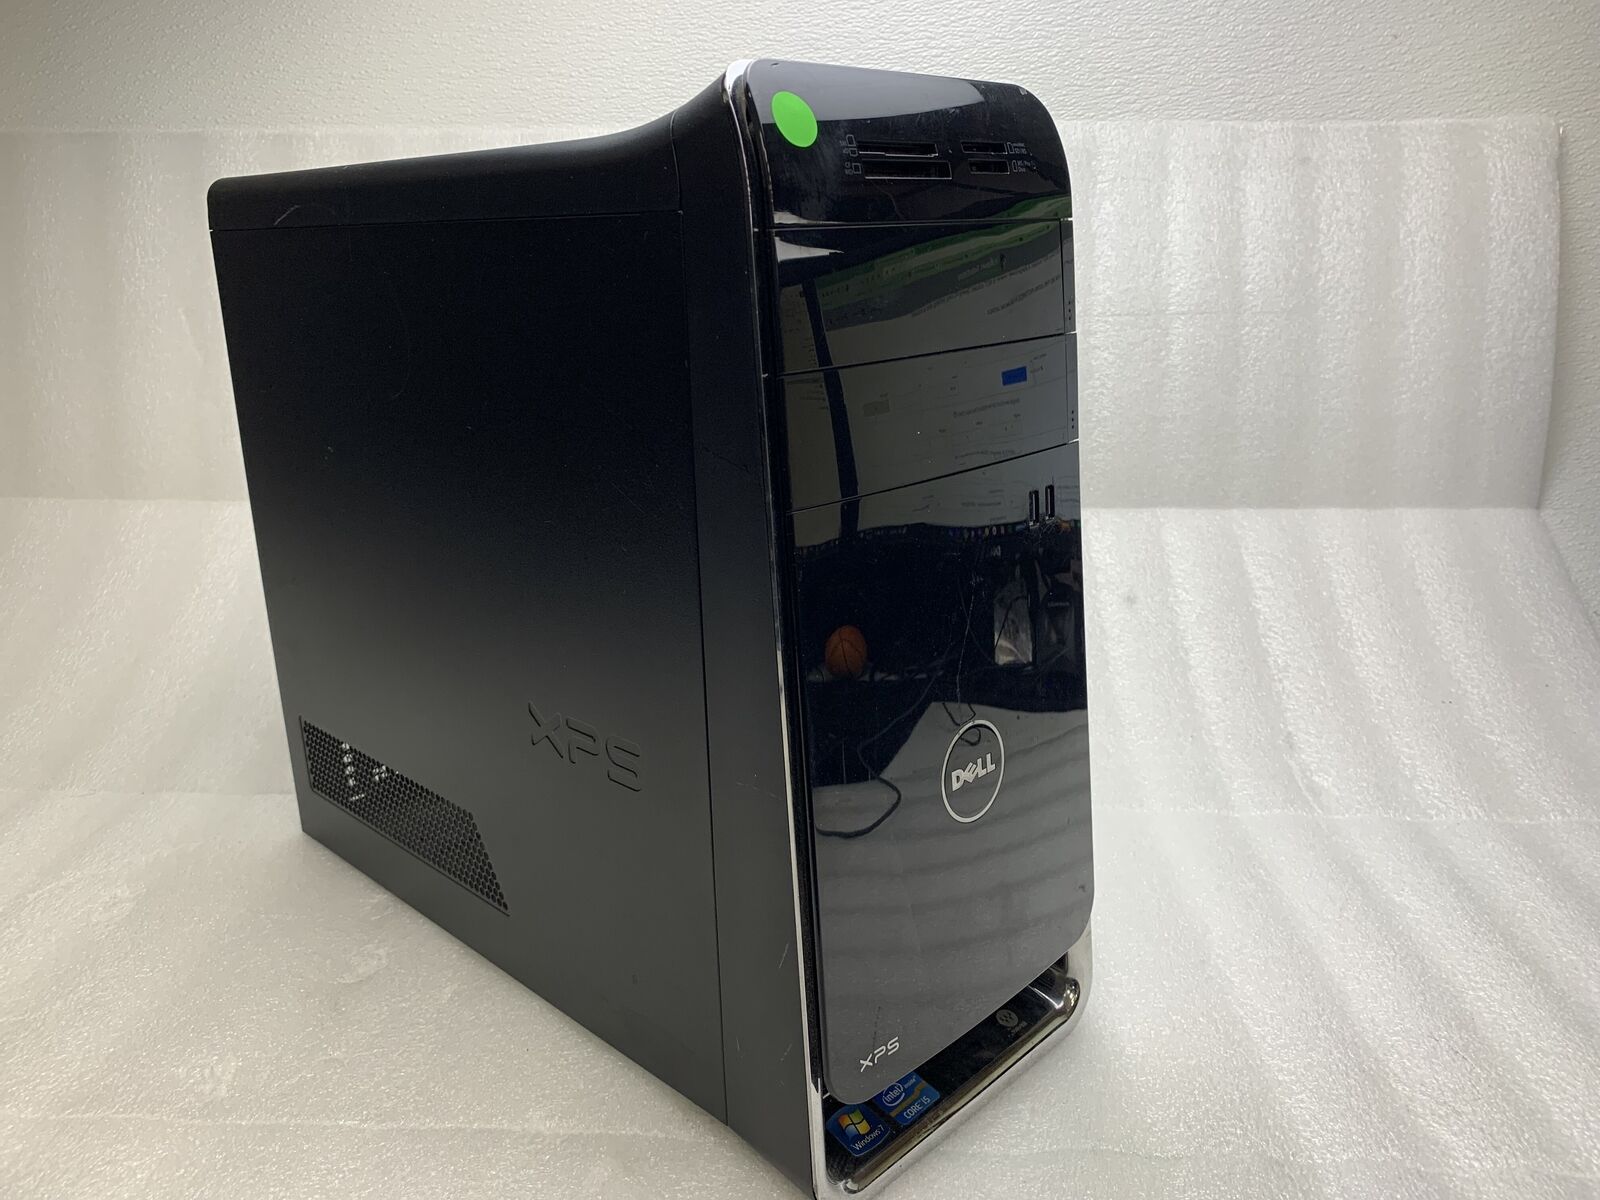 Dell XPS 8500 Desktop BOOTS Core i5-3450 @ 3.1GHz 8GB RAM NO HDD/OS